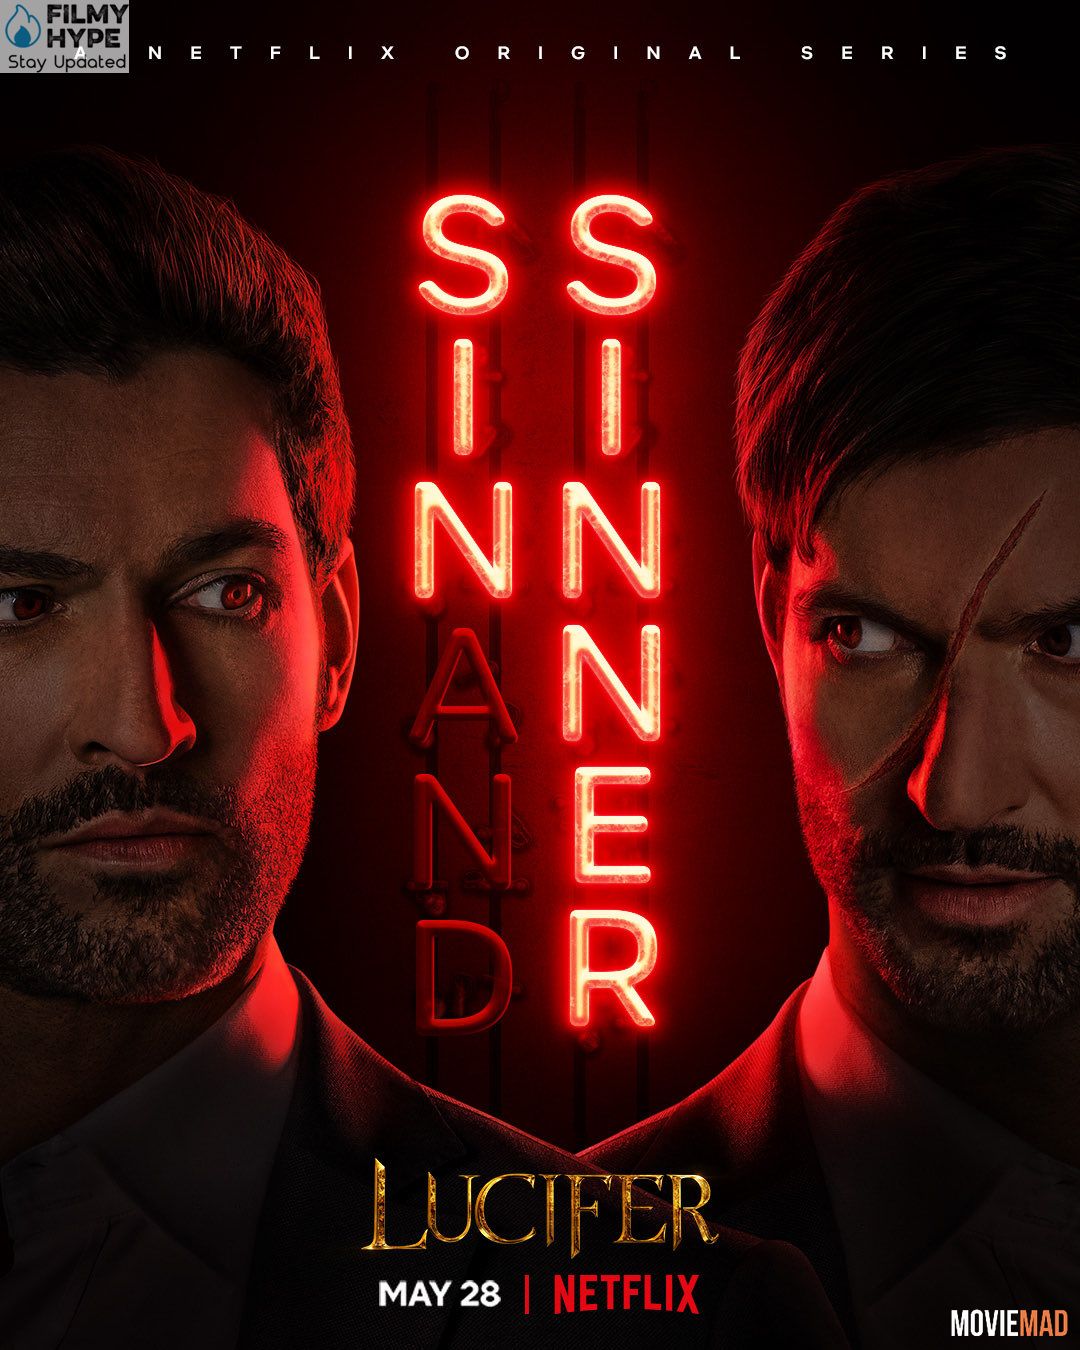 Lucifer 2021 S05 Part 2 HDRip Complete Hindi Dubbed NF Series 720p 480p